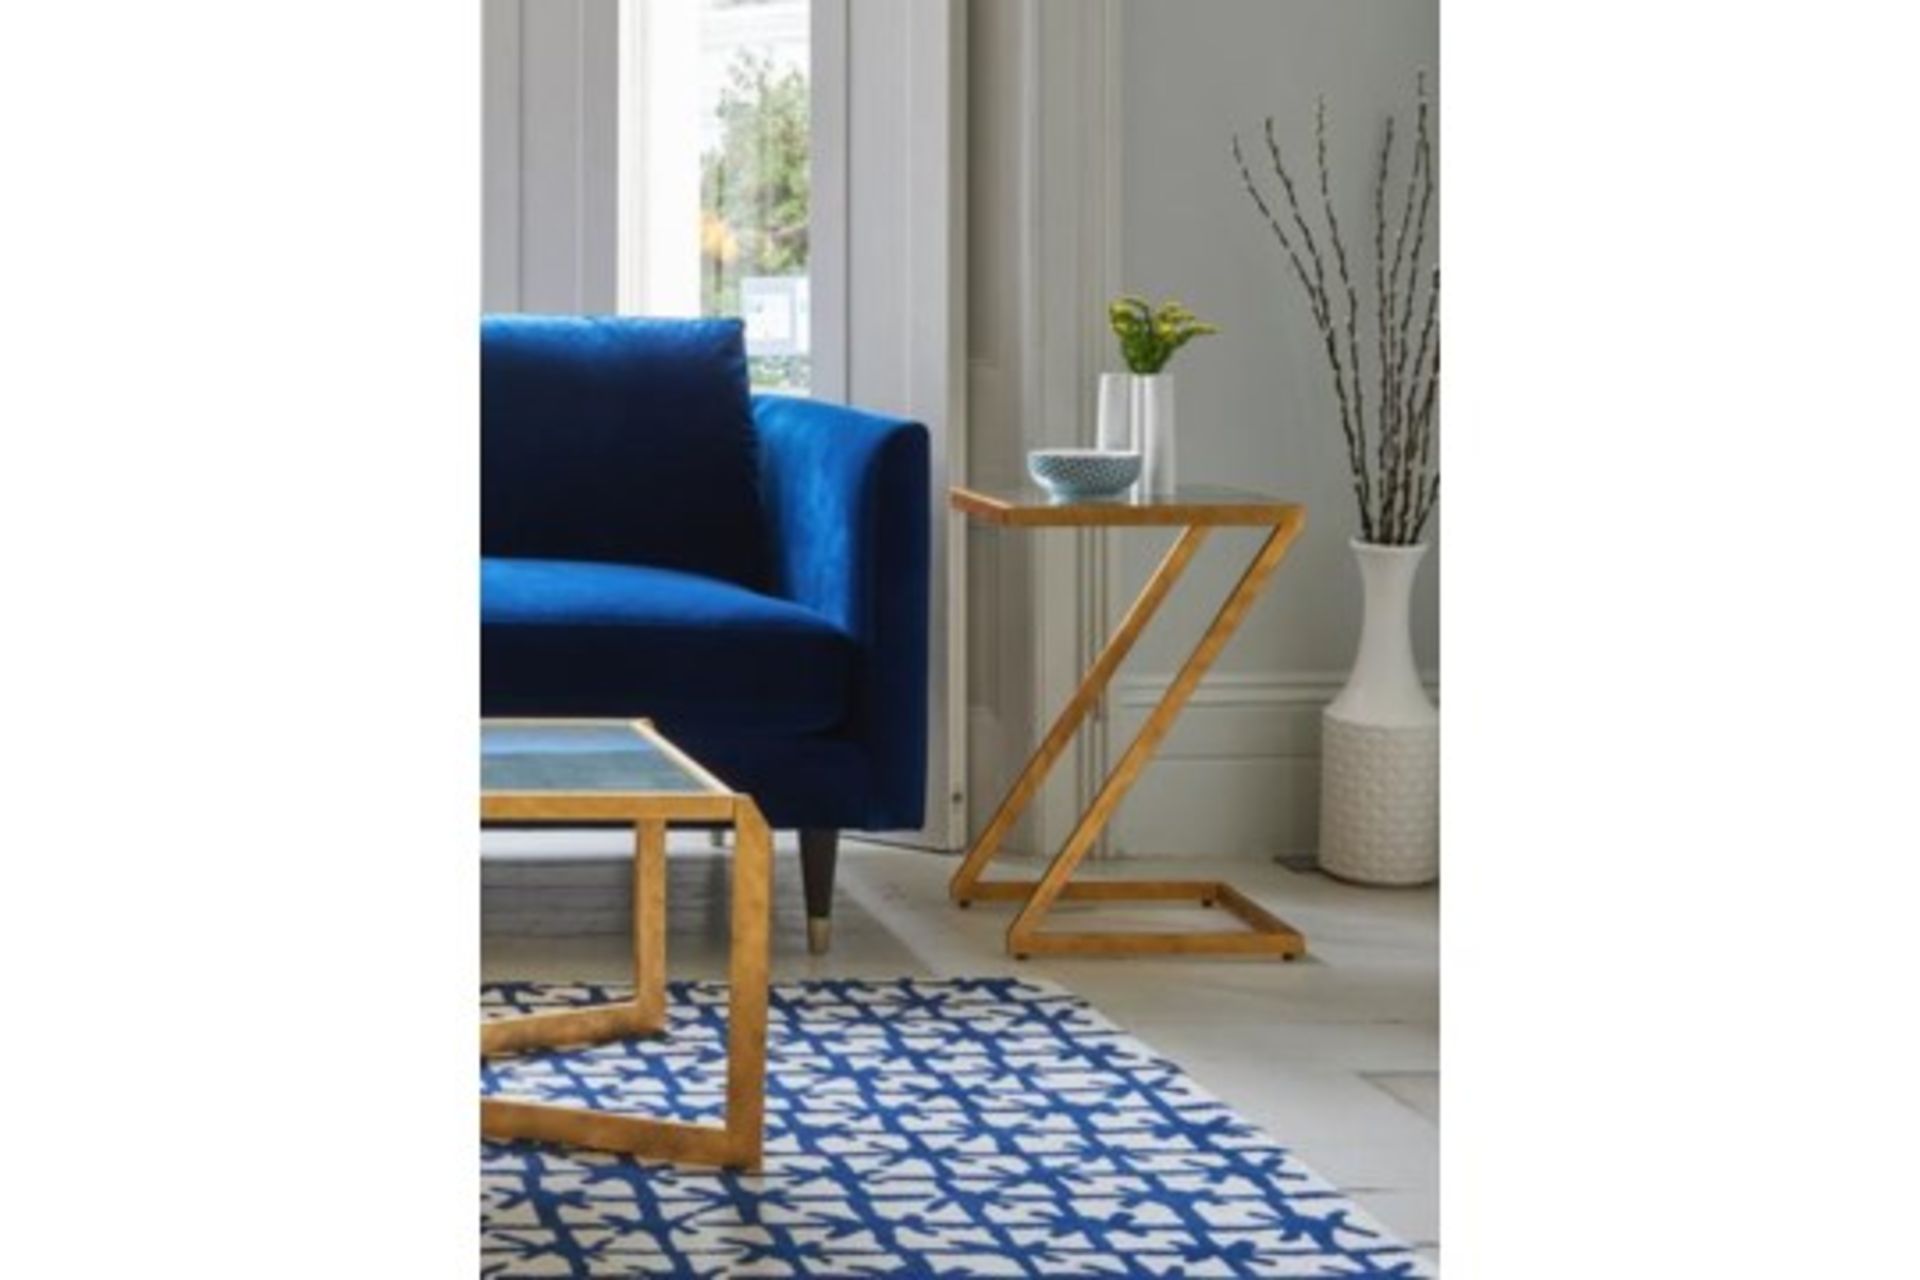 Henry Two Seater Velvet Sofa - Royal Blue Henry is a contemporary sofa collection with classic - Image 3 of 3